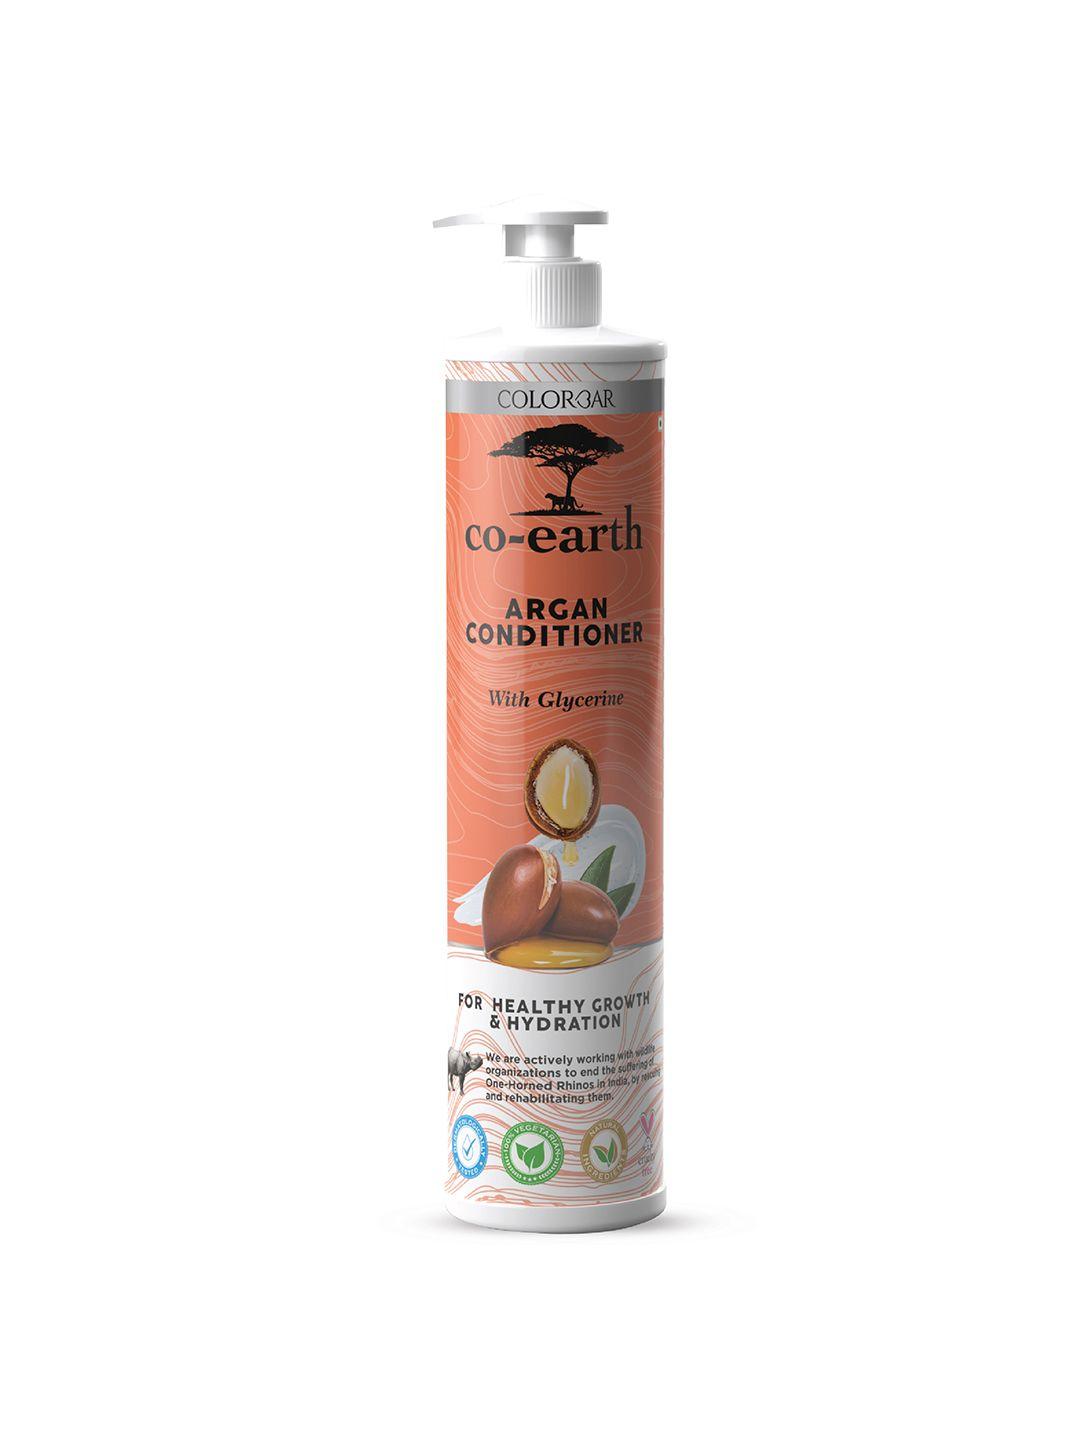 colorbar co-earth argan cruelty-free conditioner with glycerin - 300 ml